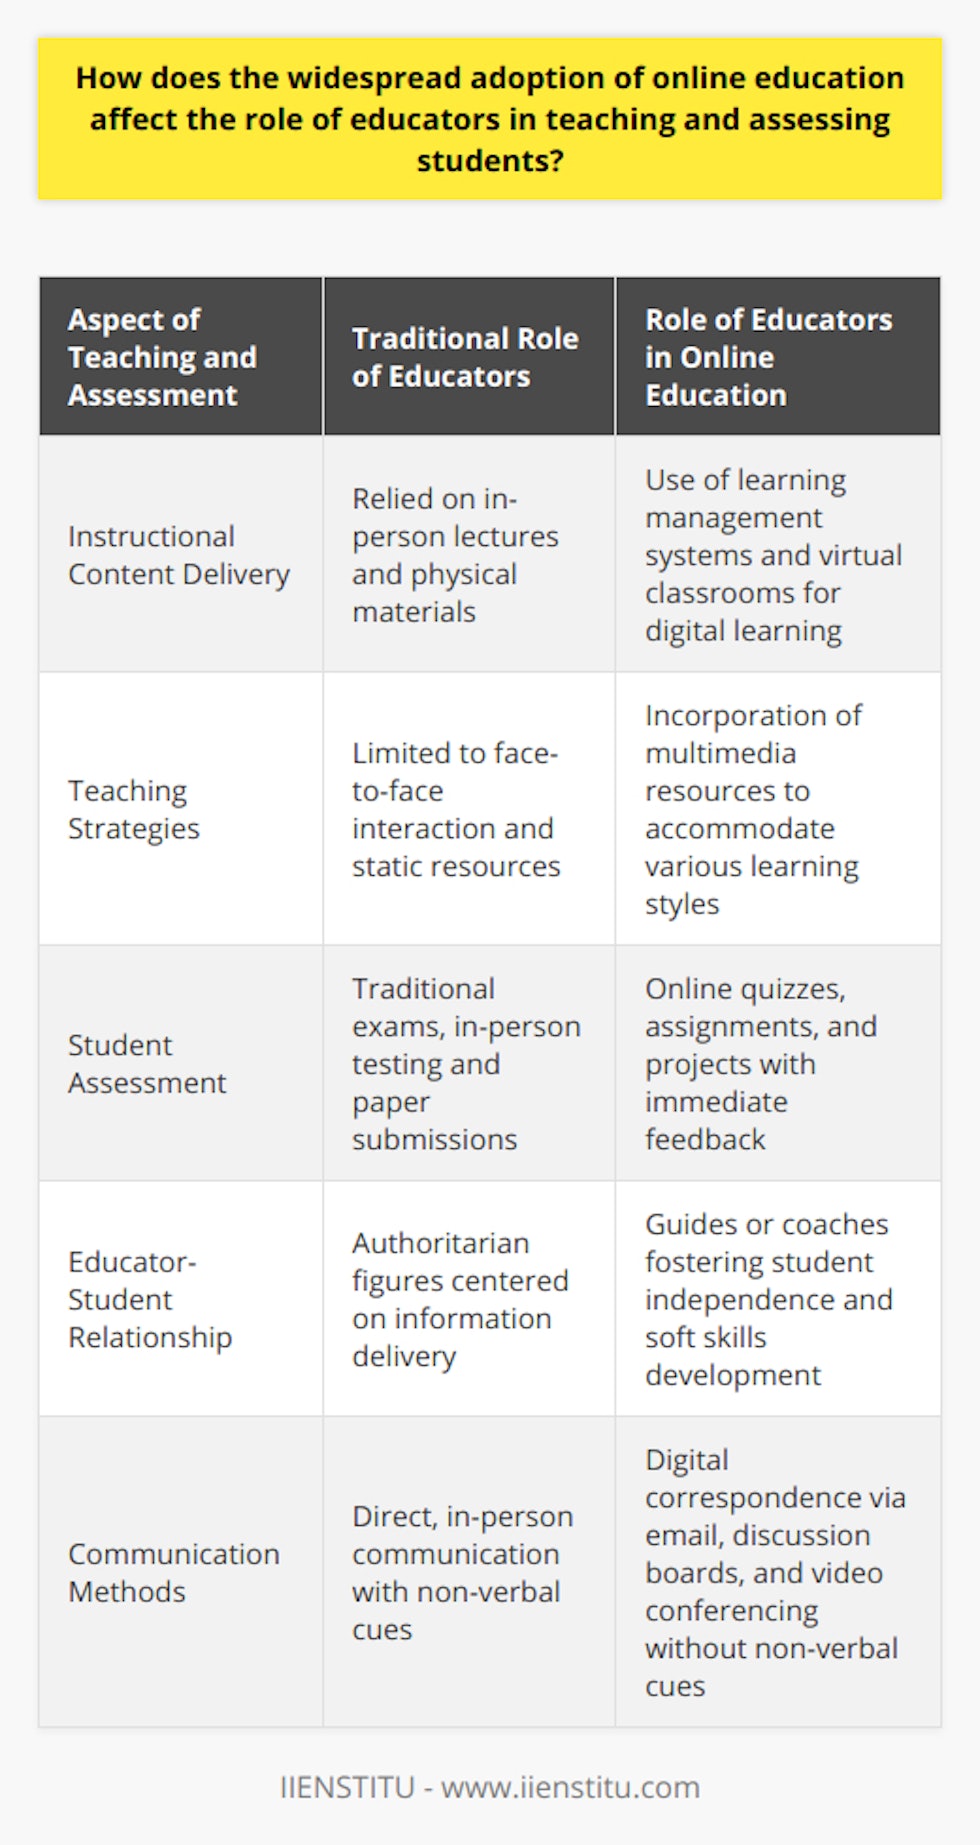 The widespread adoption of online education has revolutionized the role of educators in the academic sphere. With the increasing shift toward e-learning, the duties and responsibilities of teachers have evolved, requiring an adaptation to new technologies and methodologies for effective teaching and assessment.Older methods that relied heavily on in-person lectures have given way to an array of digital learning tools. To keep pace with these changes, educators are embracing a variety of online platforms to deliver instructional content. These platforms can include learning management systems and virtual classrooms provided by institutions like IIENSTITU, which facilitate the seamless blending of technology into the educational experience.A significant aspect of the role transformation is the integration of innovative teaching strategies. By incorporating multimedia resources, educators not only enhance the learning experience but also provide diverse ways to cater to different learning styles. Interactive videos, podcasts, and comprehensive digital libraries are now integral elements of an educator's toolkit.The evaluation and assessment of students have also shifted to align with online modalities. Traditional exams and paper submissions are being replaced or complemented by online quizzes, assignments, and projects. These new forms of assessment allow for immediate feedback, which can be crucial for student engagement and success in the online realm.As online education promotes self-directed learning, educators find themselves transitioning from authoritarian figures to guides or coaches. They no longer solely deliver information but support and motivate students as they navigate their learning journeys independently. This change underscores the need for fostering soft skills such as critical thinking, time management, and research skills among students.Enhanced communication has become an indispensable component of the transformed educator's role. The virtual environment lacks non-verbal cues present in traditional classrooms, emphasizing the need for clear and effective written and verbal communication. Educators must now be proficient in managing digital correspondence through emails, online discussion boards, and video conferencing to maintain consistent engagement with their students.In conclusion, the role of educators in the age of online education is more dynamic and multifaceted than ever before. Teachers are now required to upskill in digital literacy, develop new teaching strategies, master virtual assessment techniques, encourage student autonomy, and prioritize effective communication. This role transformation poses challenges but also offers educators the opportunity to reshape education for a digital future, crafting innovative ways to facilitate and assess student learning in an ever-evolving landscape.